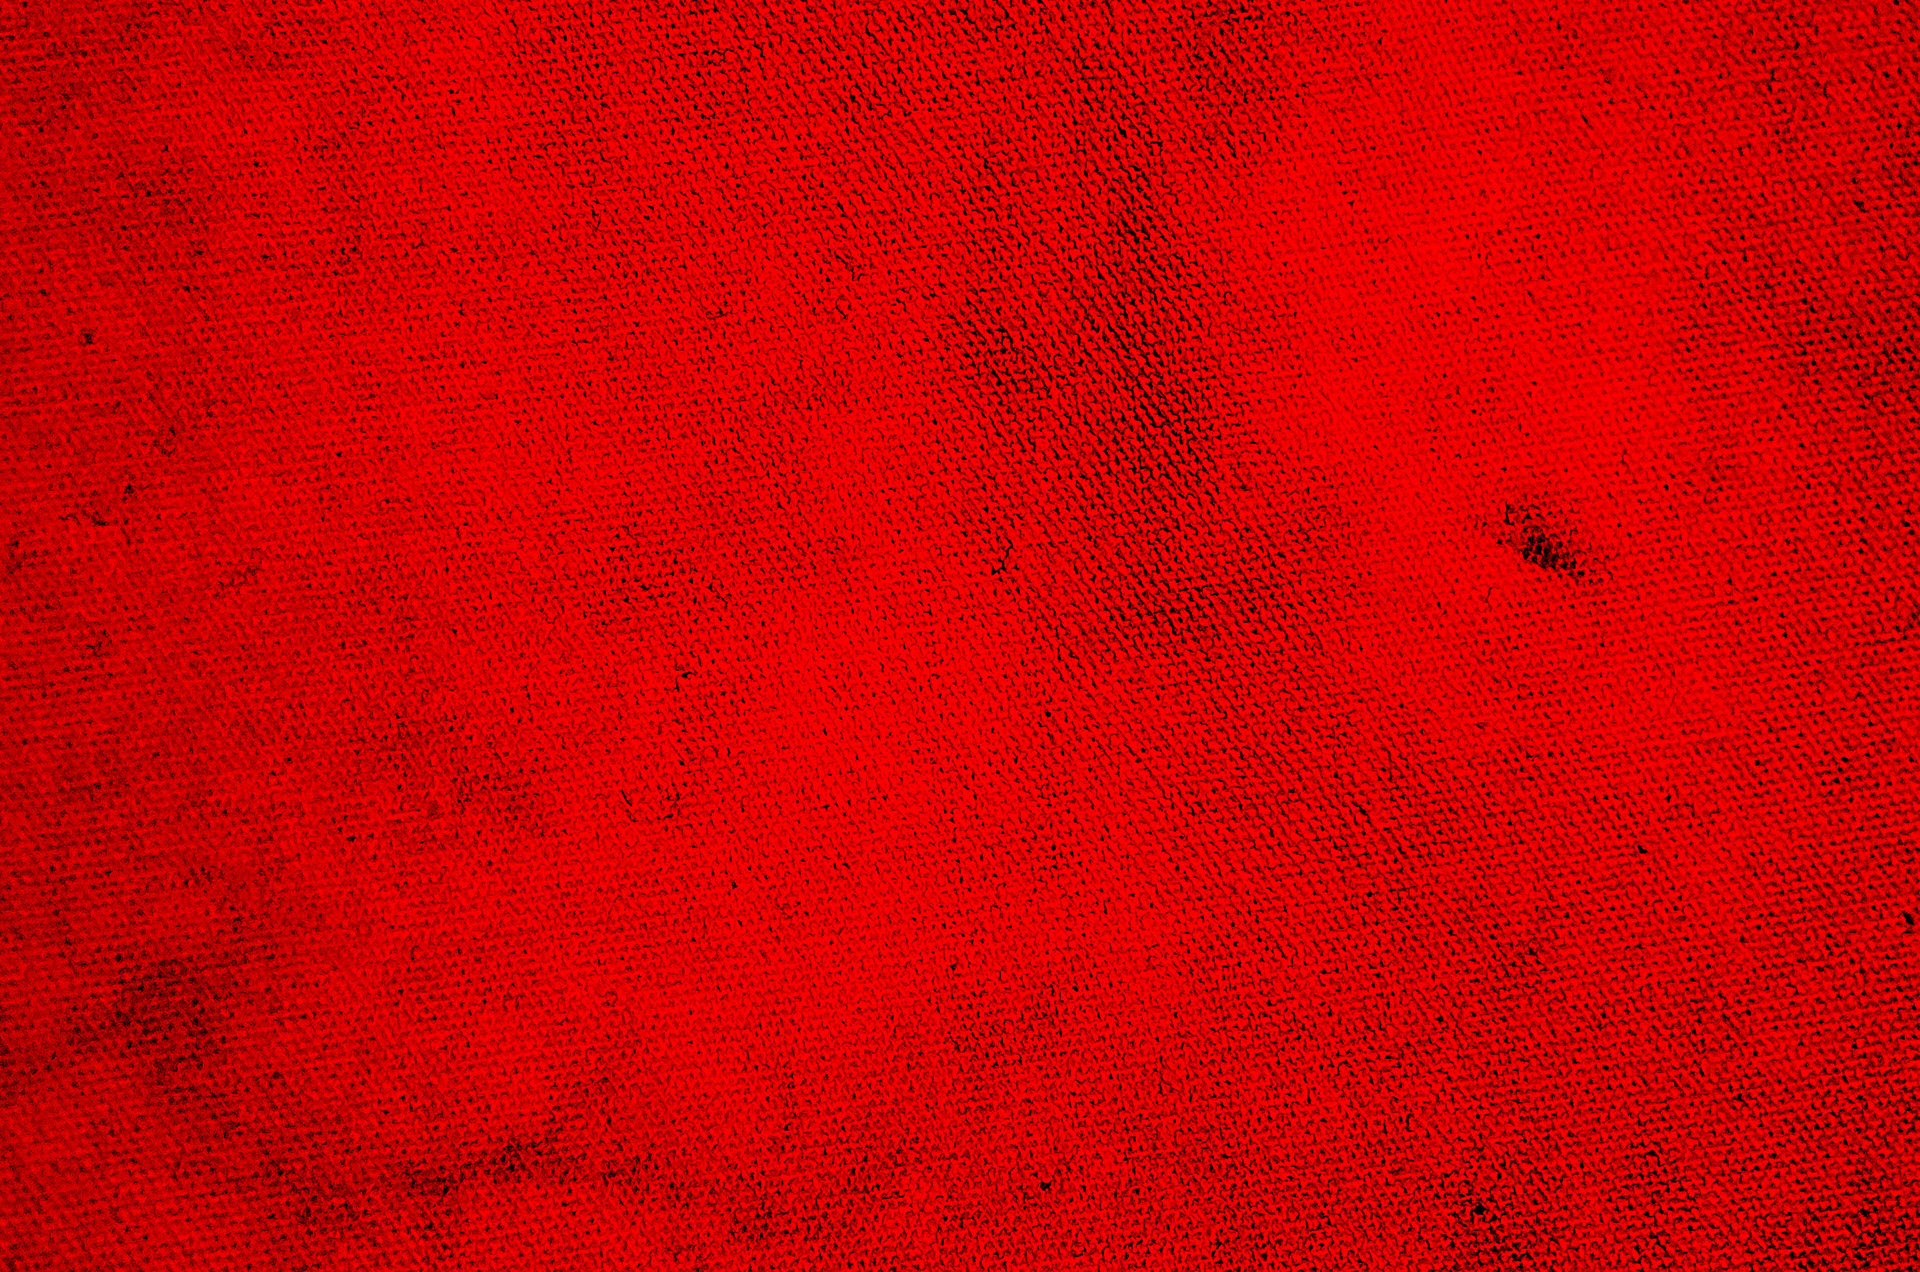 HD Red Background Images: Download Red Images for Free